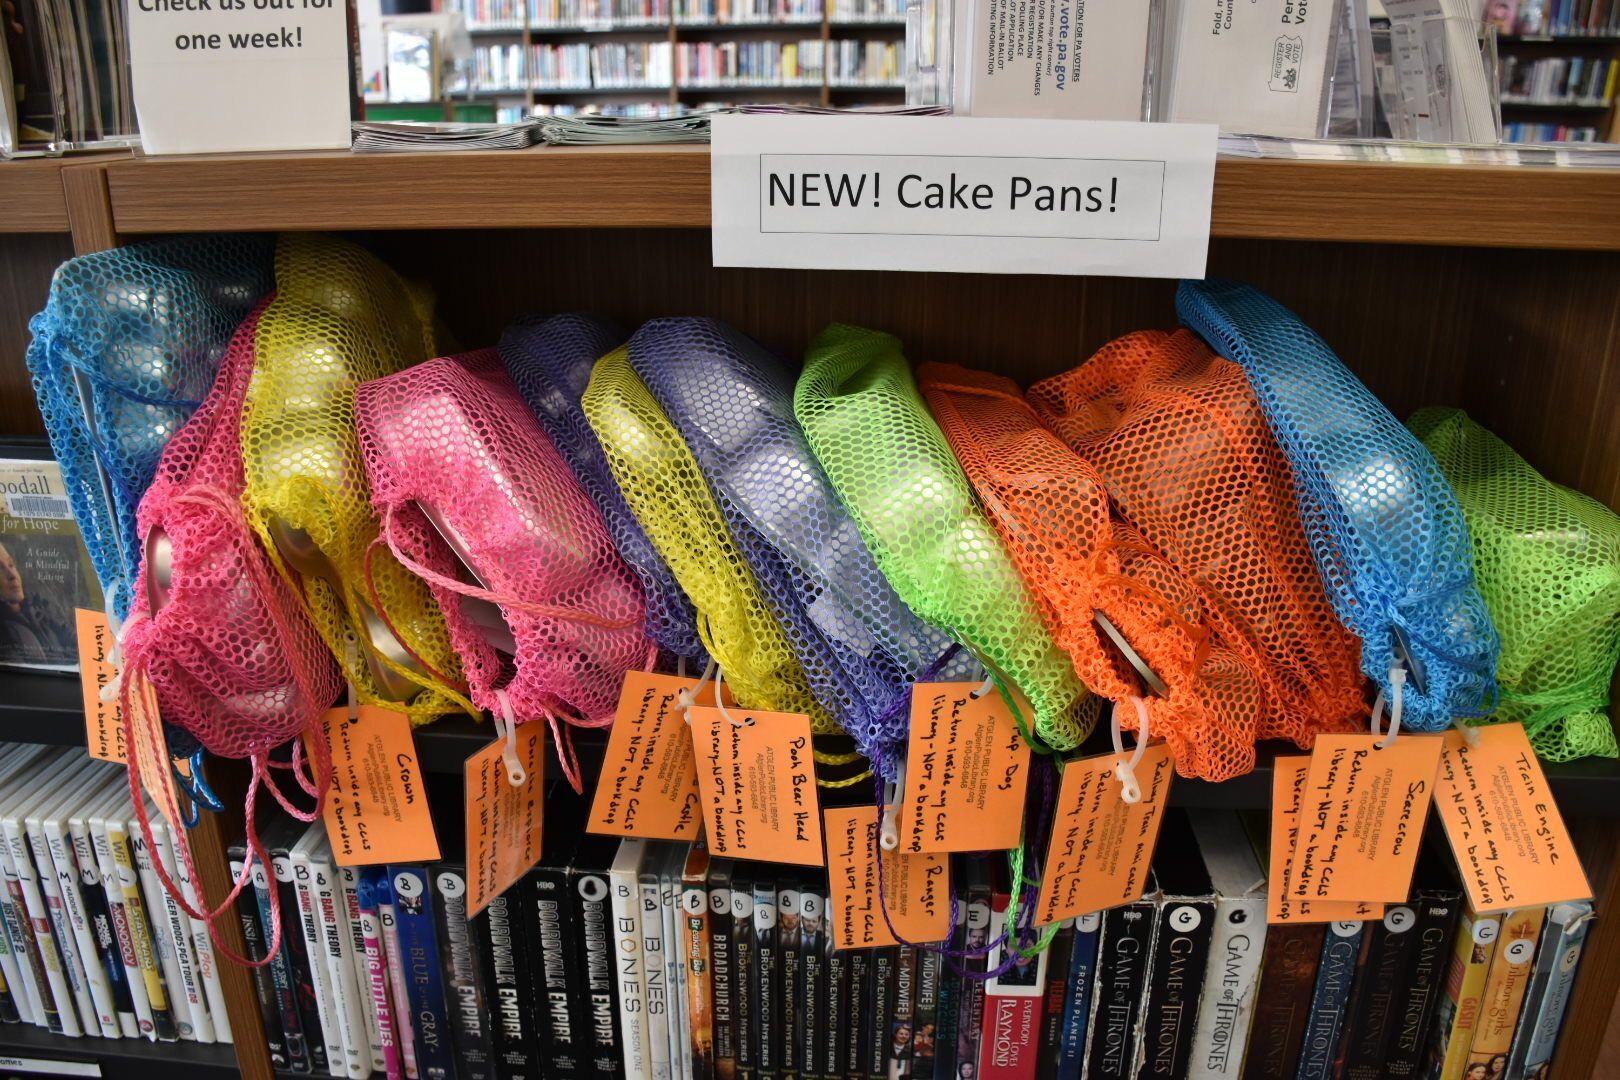 Specialty cake pans in colorful mesh bags on a library book shelf.